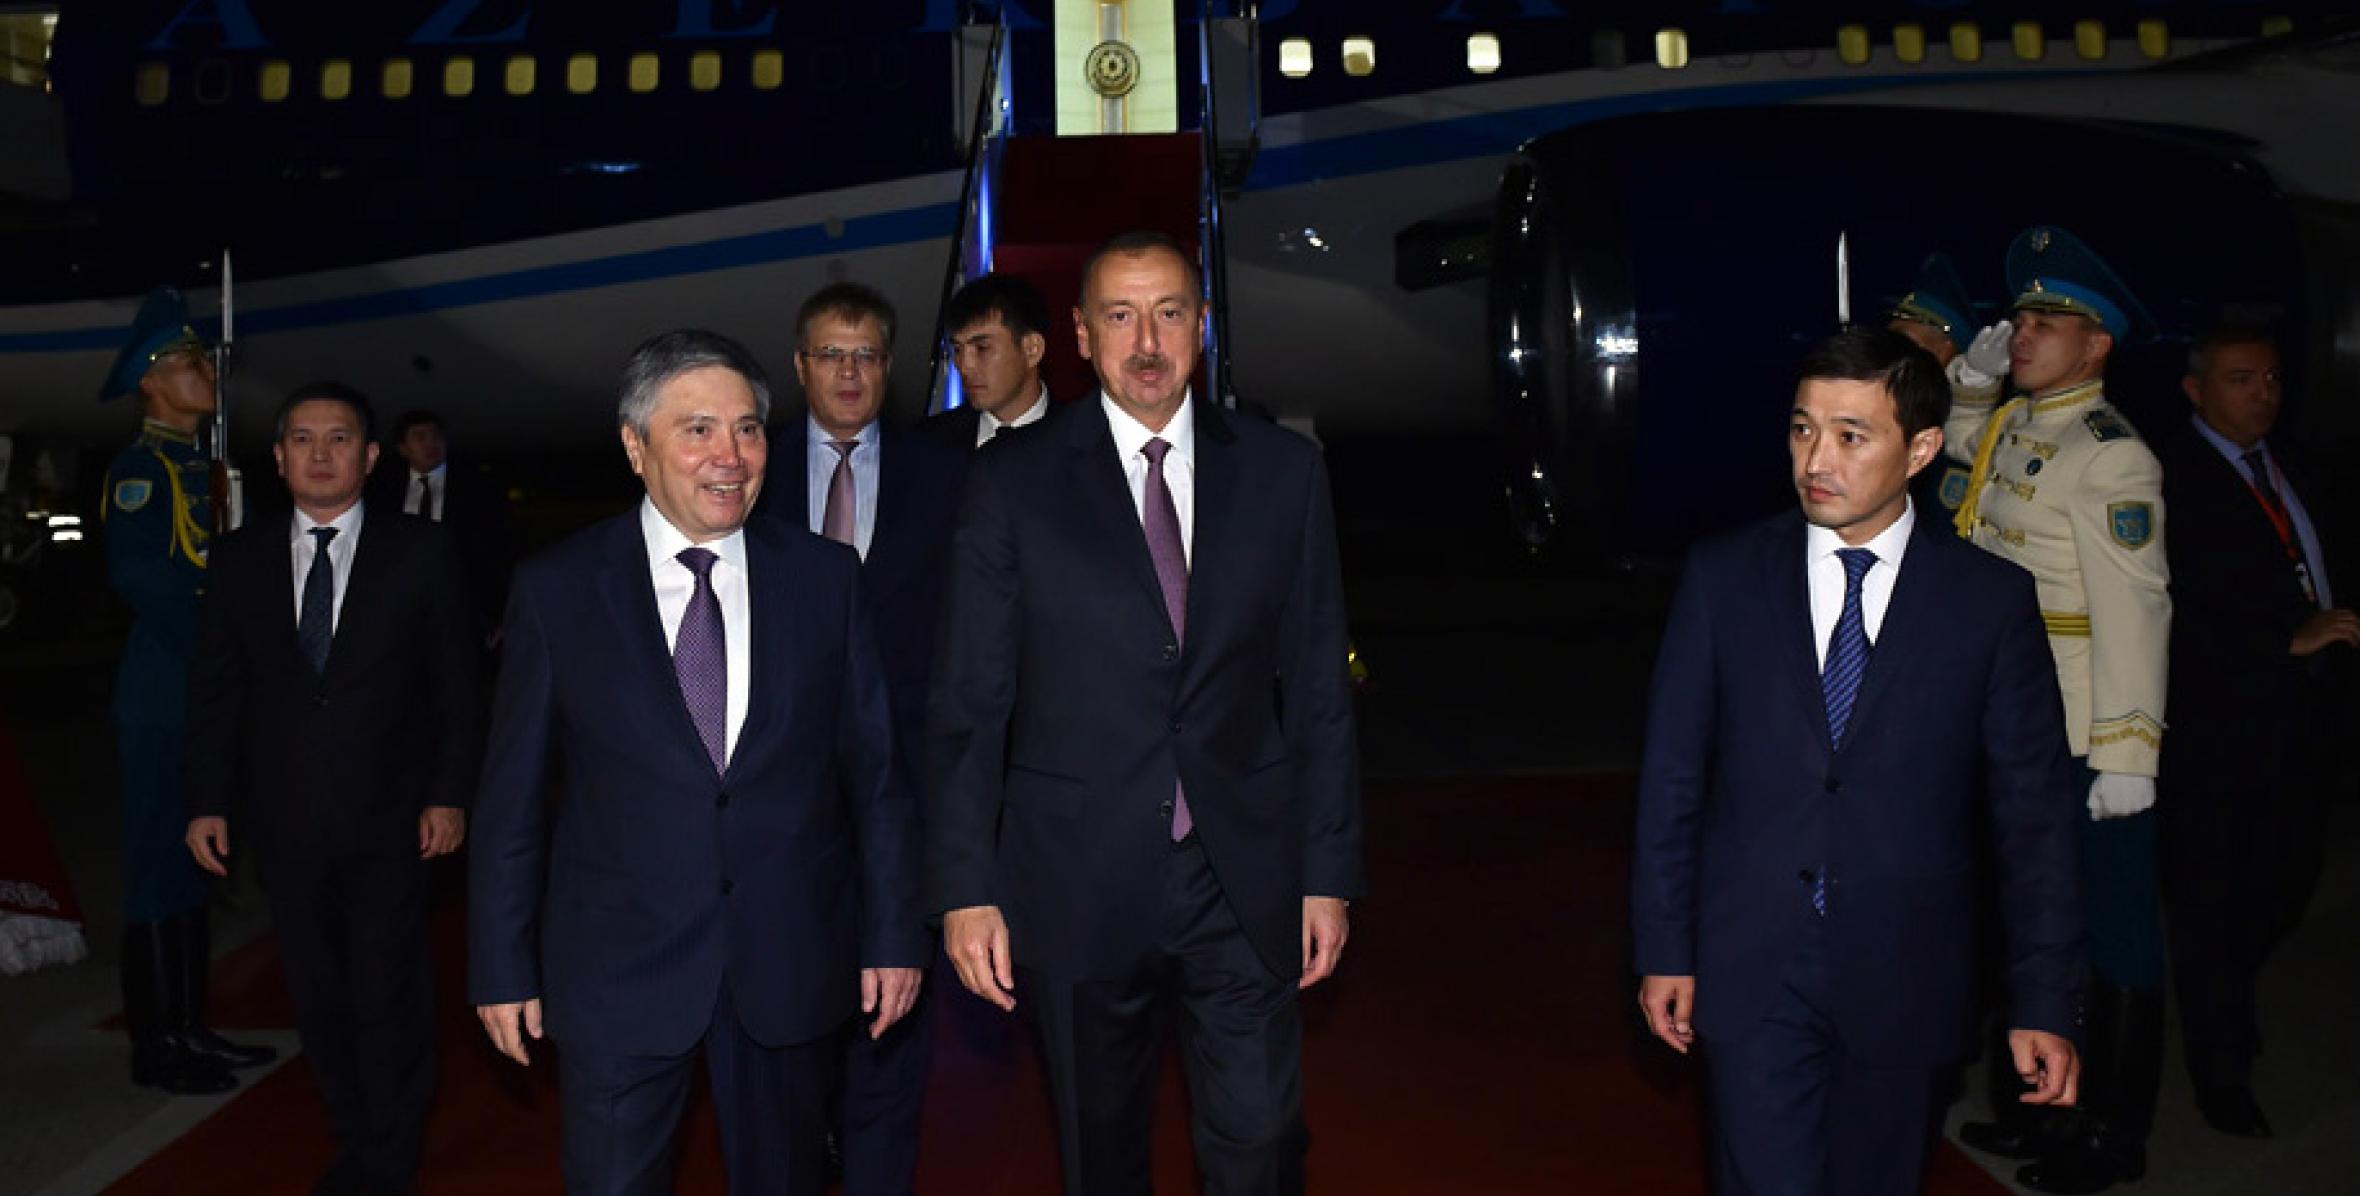 Ilham Aliyev arrived in Astana for a working visit